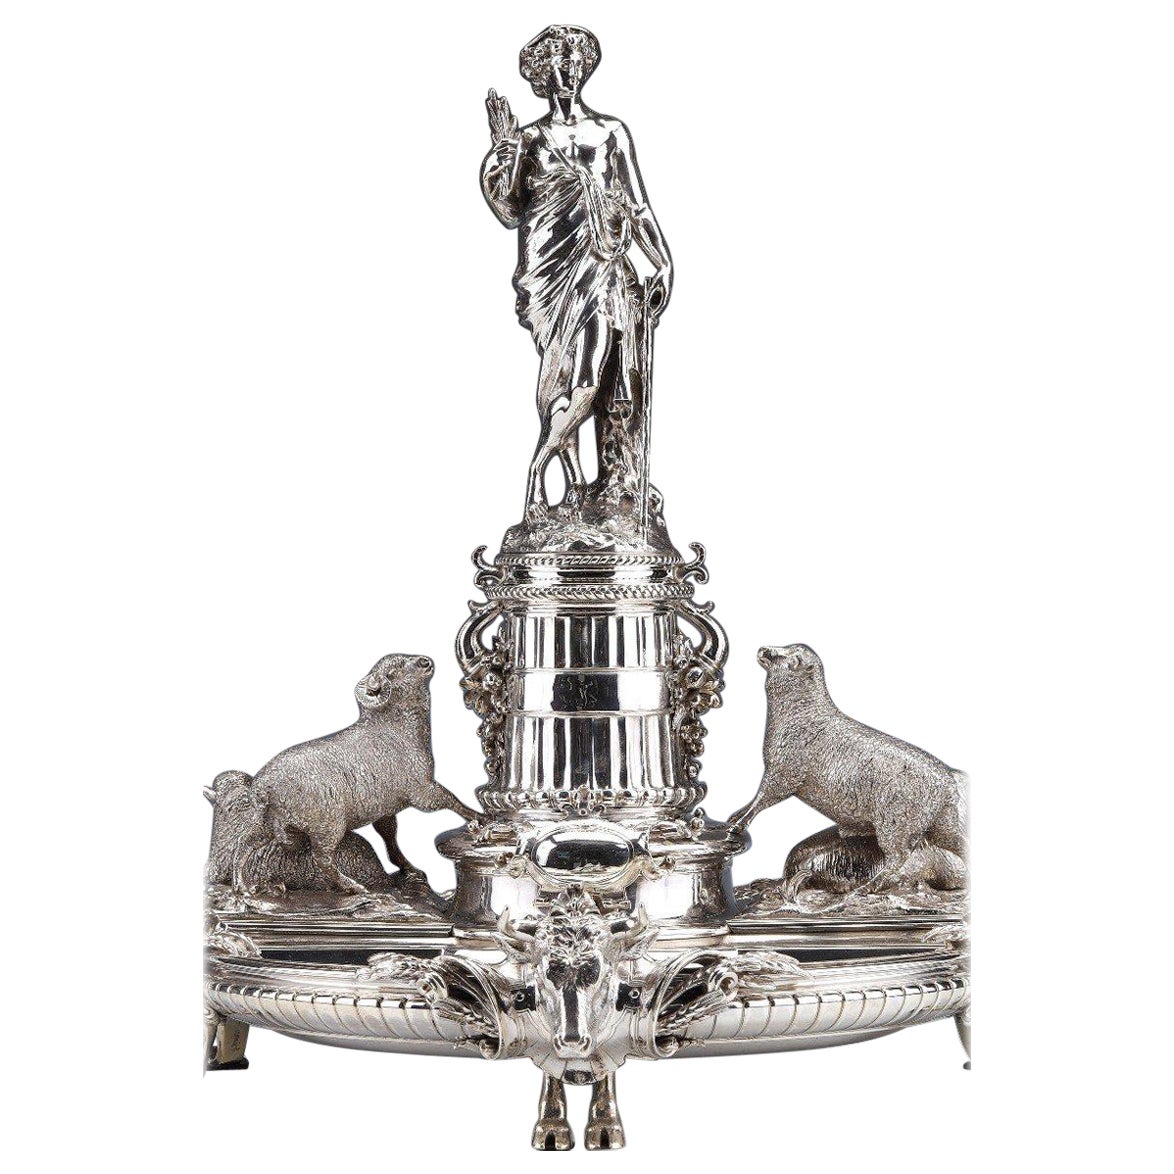 Christofle - Important Table Centerpiece In Sterling Silver Nineteenth For Sale